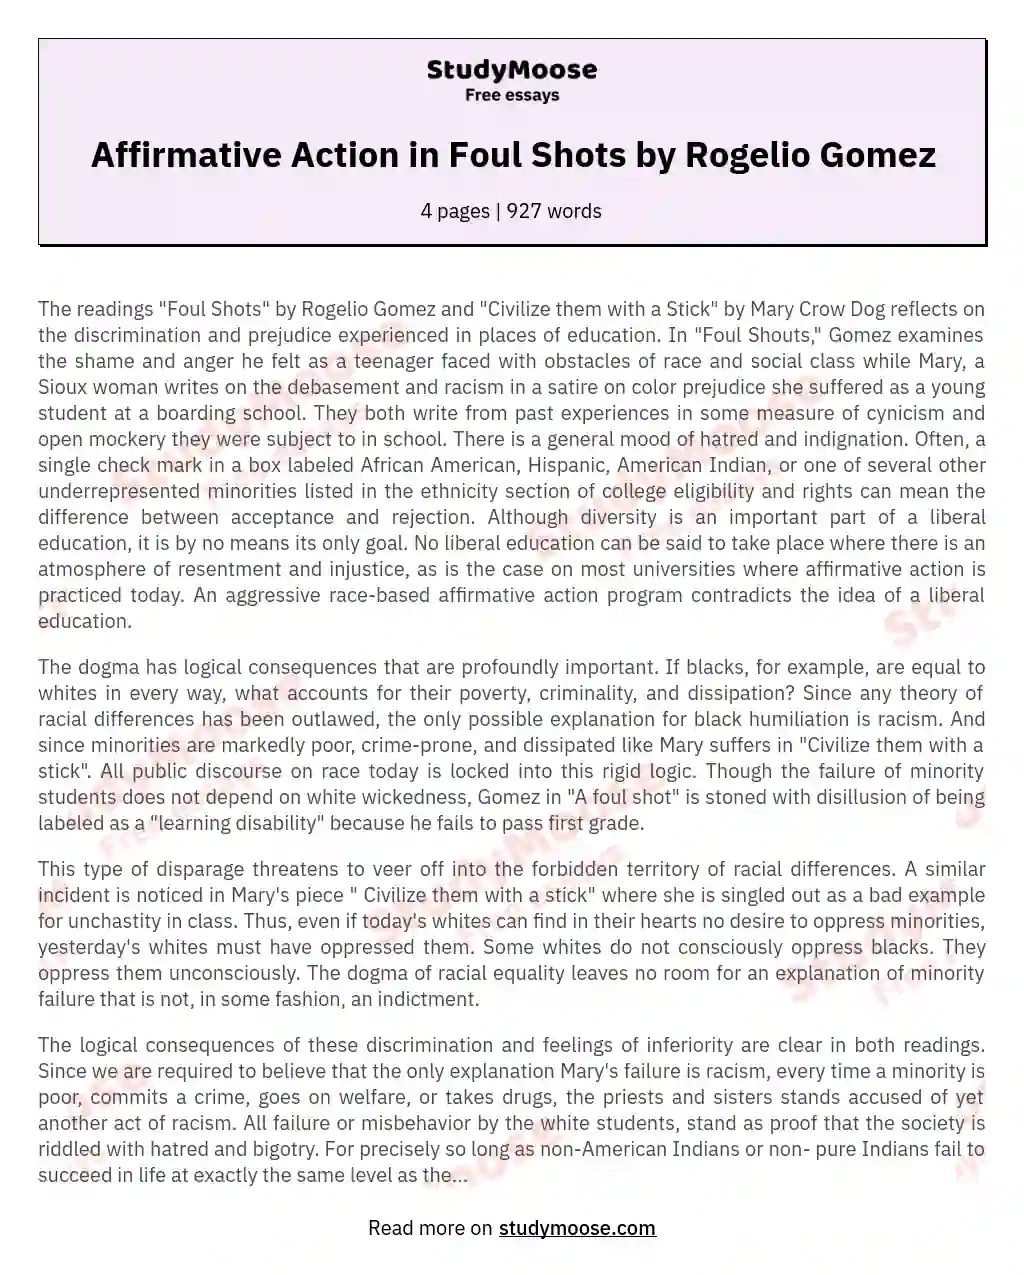 Affirmative Action in Foul Shots by Rogelio Gomez essay